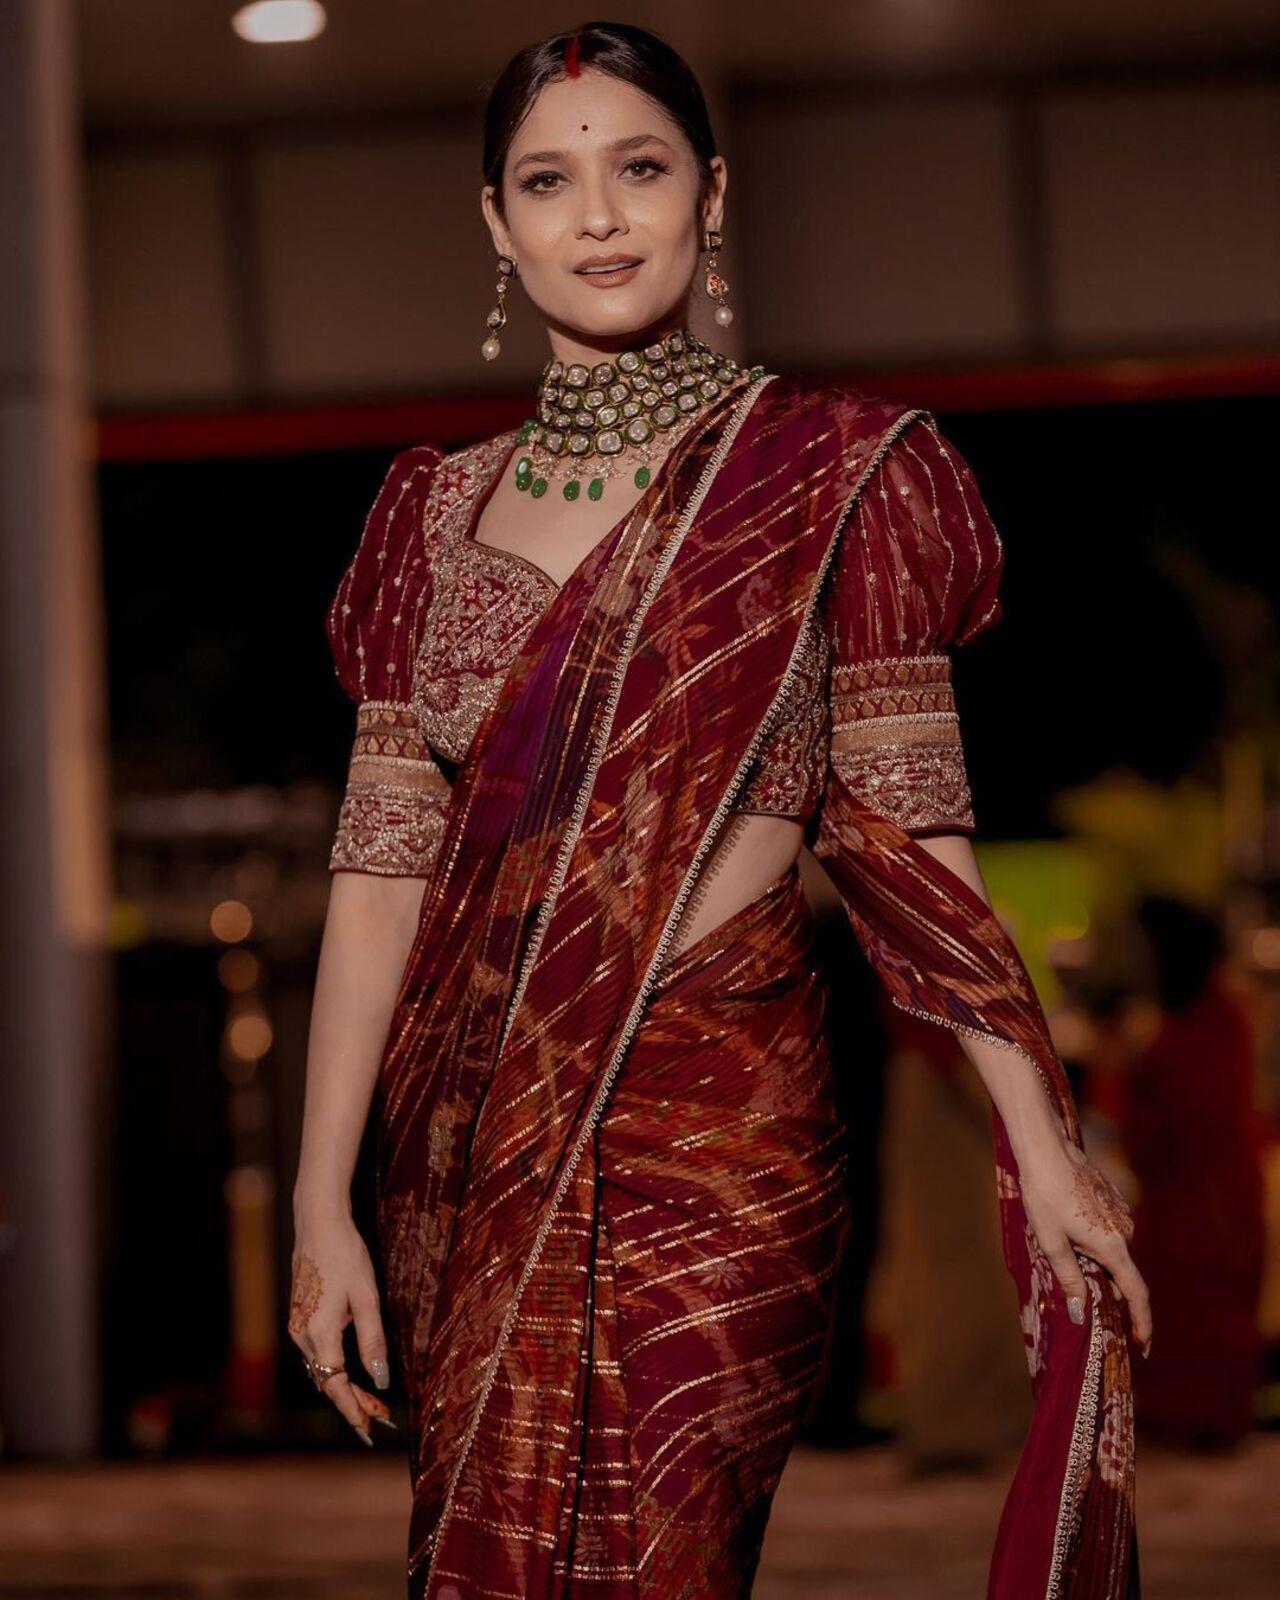 Ankita Lokhande opted for a stunning maroon-coloured saree and paired it with a heavy blouse. The puffed sleeves of the blouse elevated her entire look